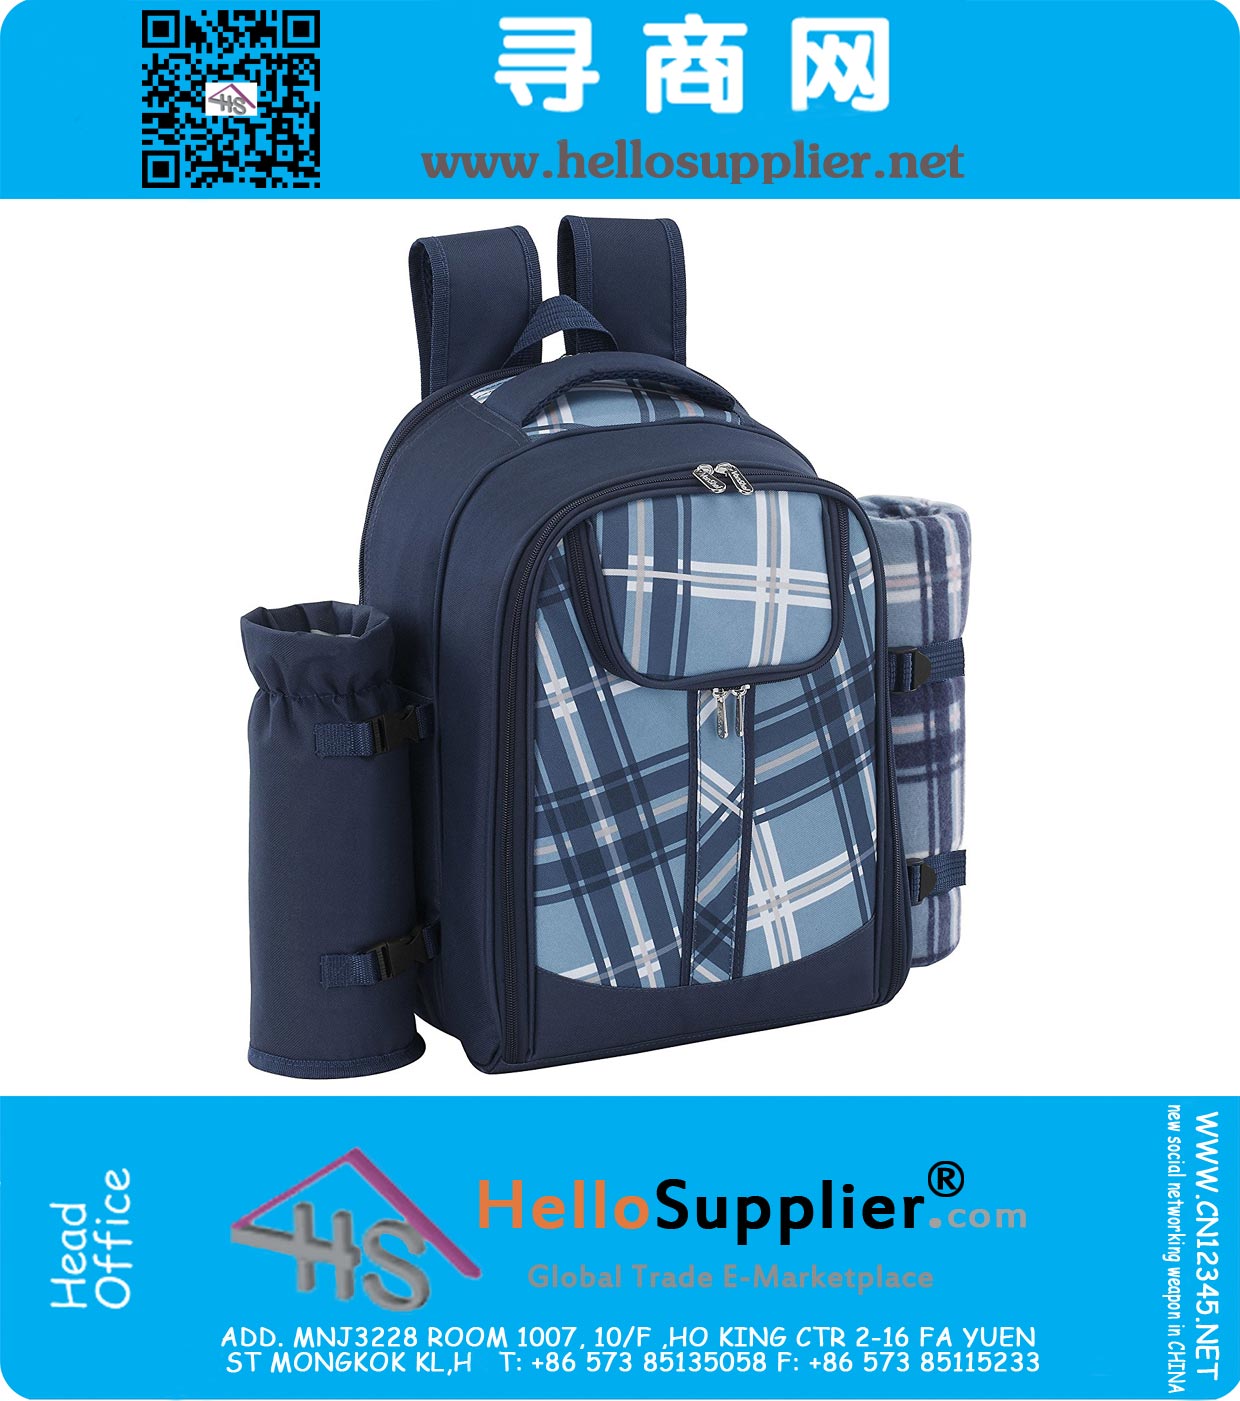 2 Person Blue Picnic Backpack Hamper with Cooler Compartment includes Tableware And Fleece Blanket